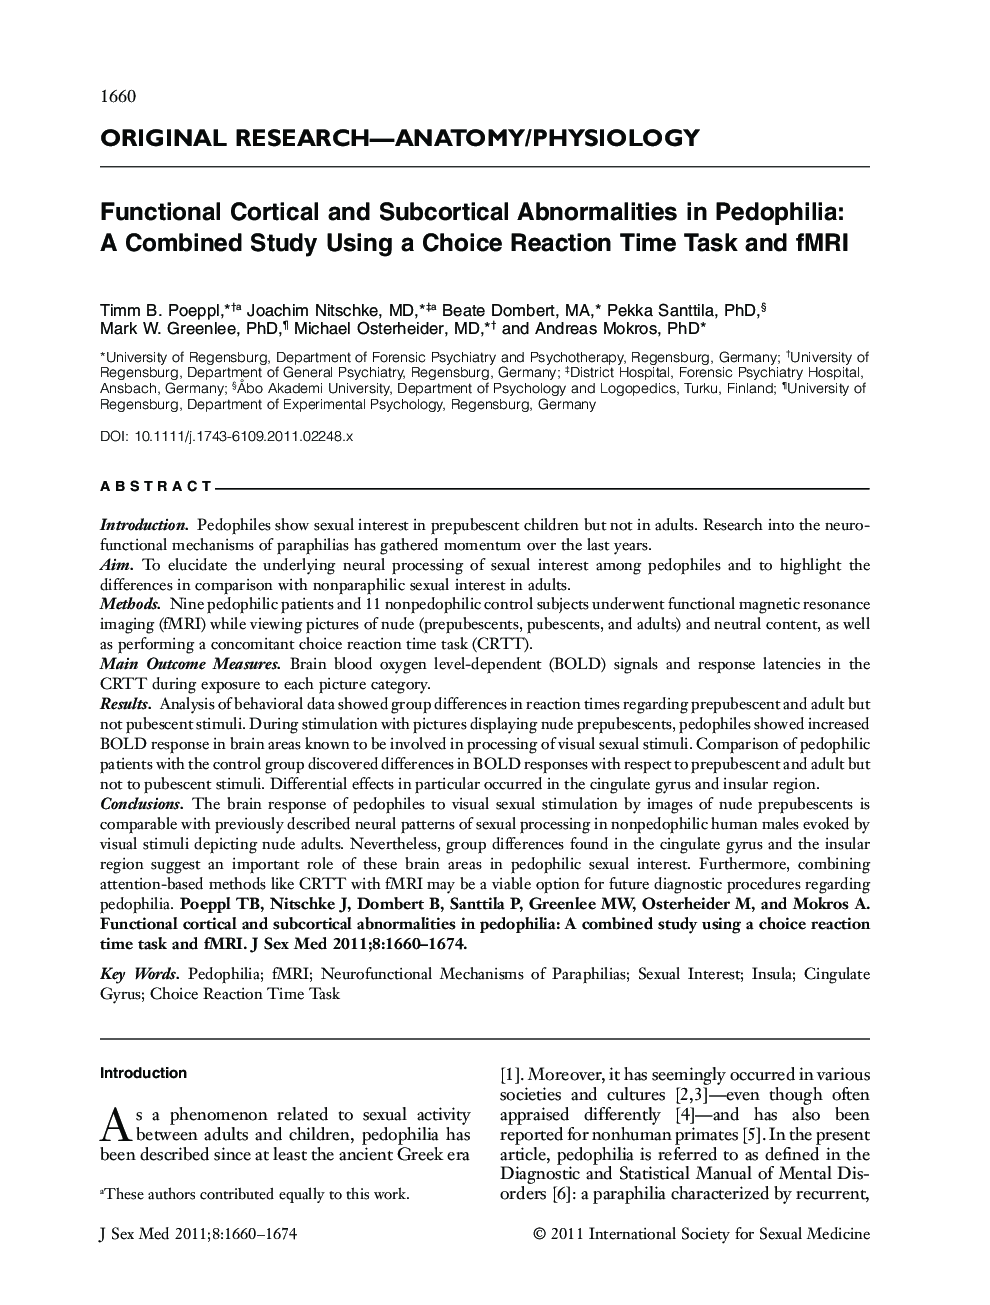 Functional Cortical and Subcortical Abnormalities in Pedophilia: A Combined Study Using a Choice Reaction Time Task and fMRI